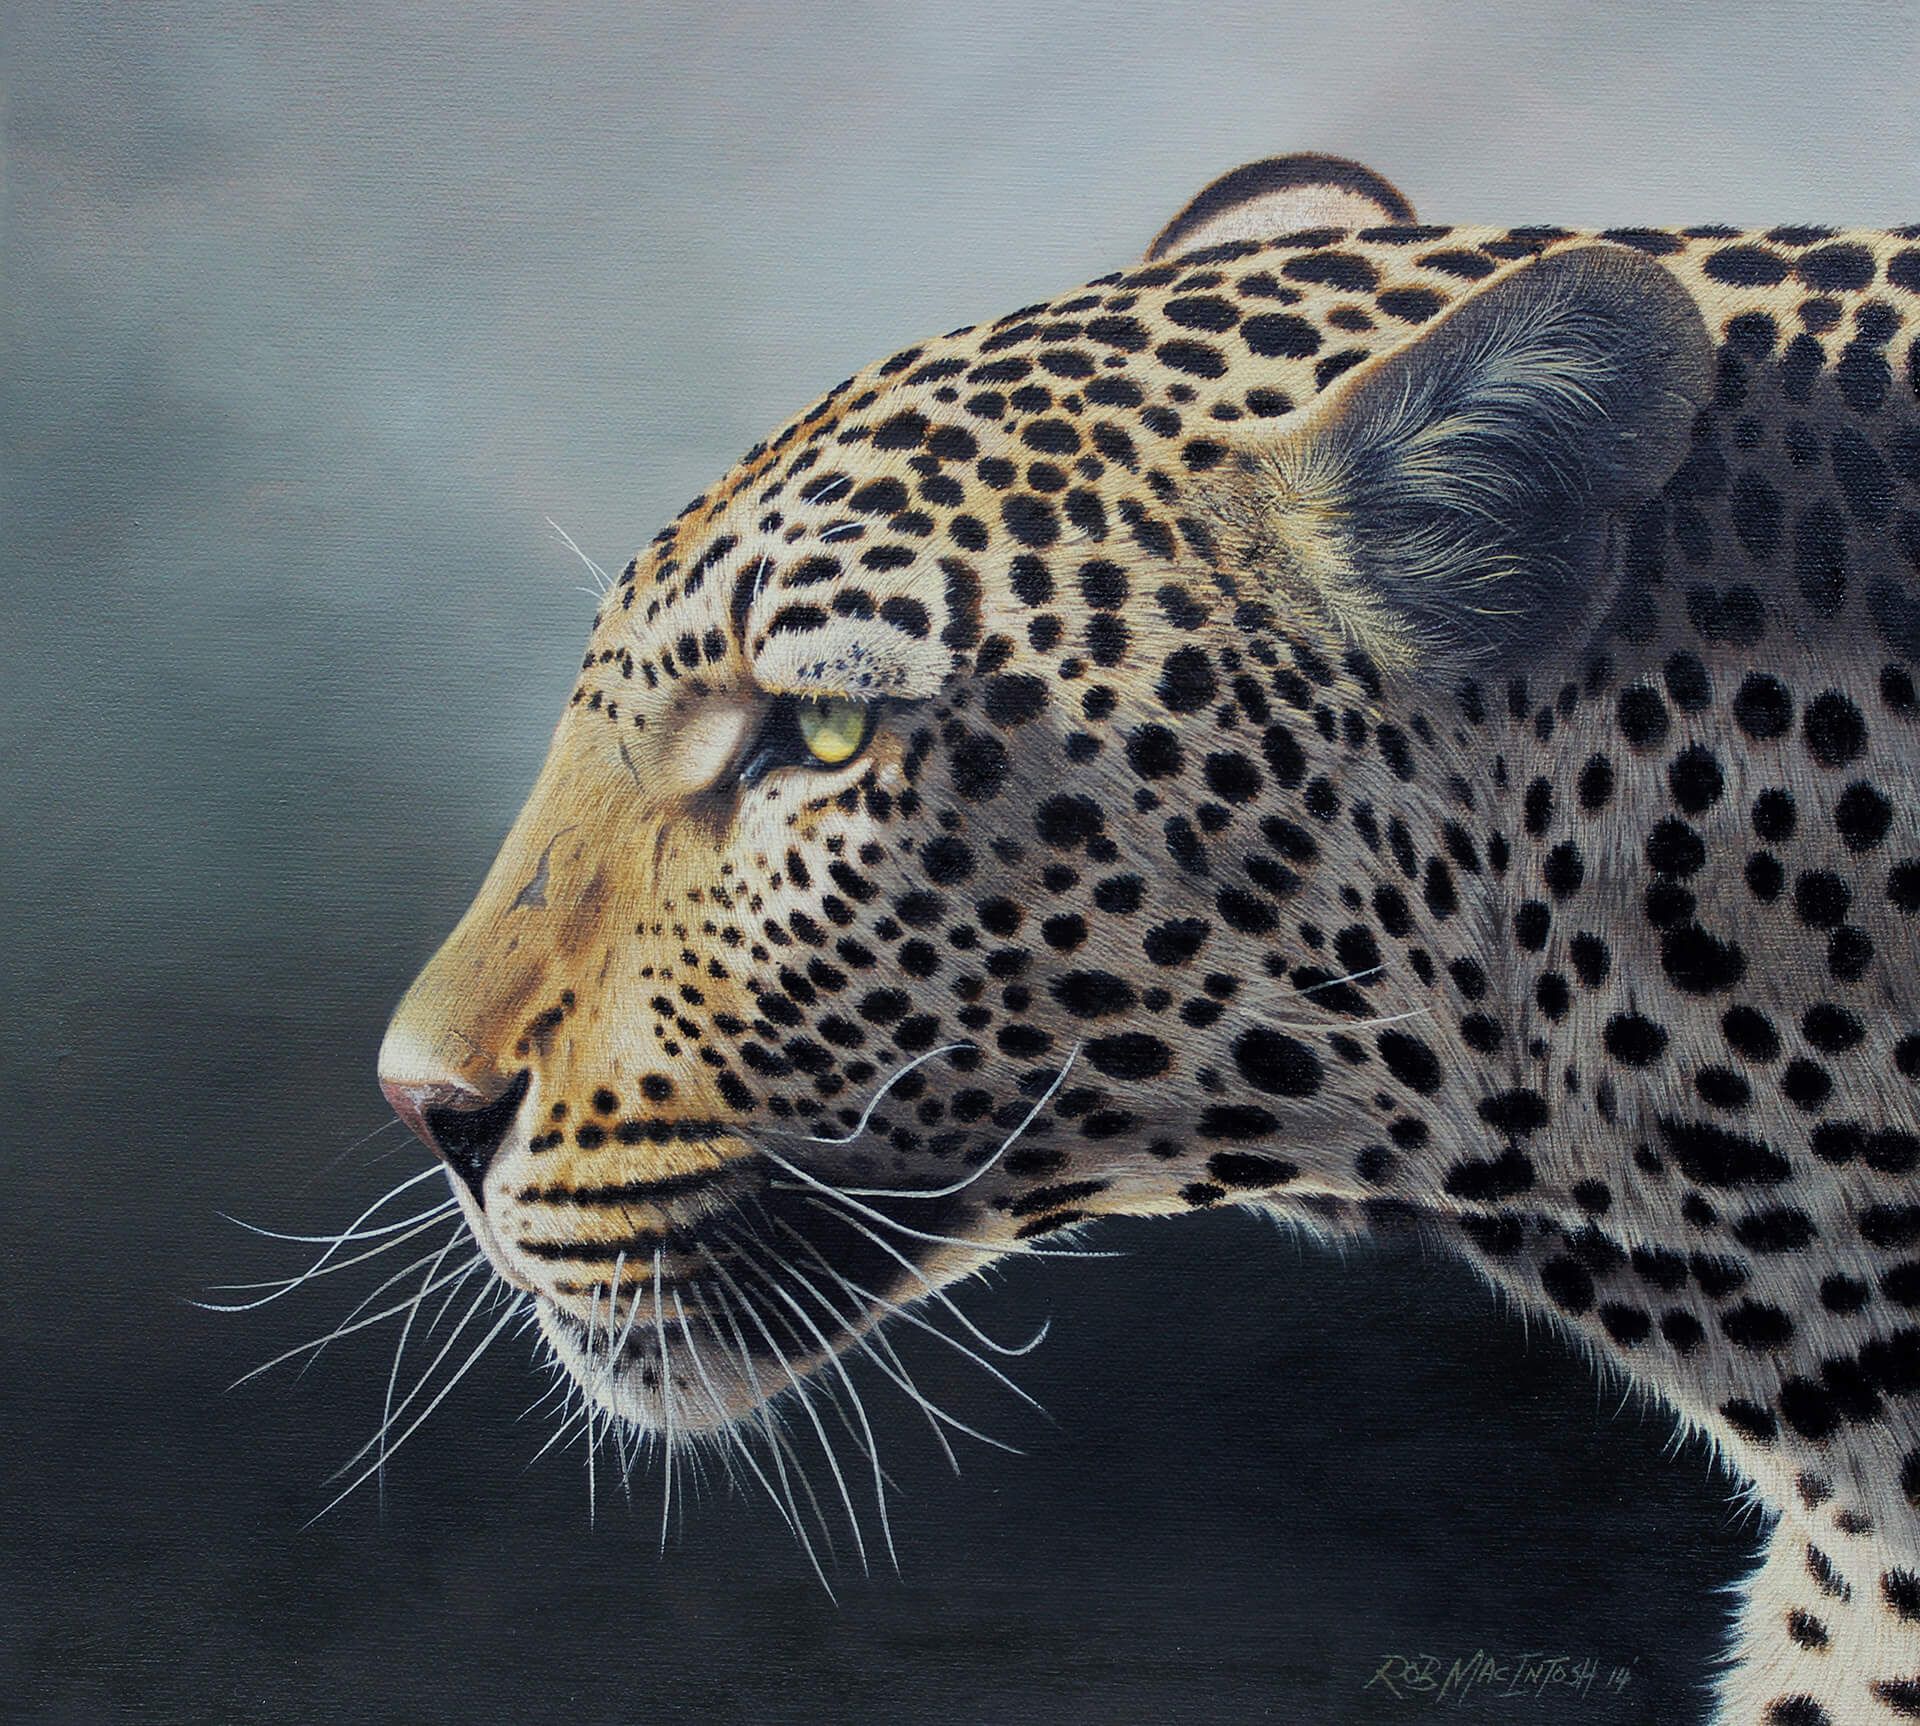 Photorealistic painting of a side portrait of a leopard's head